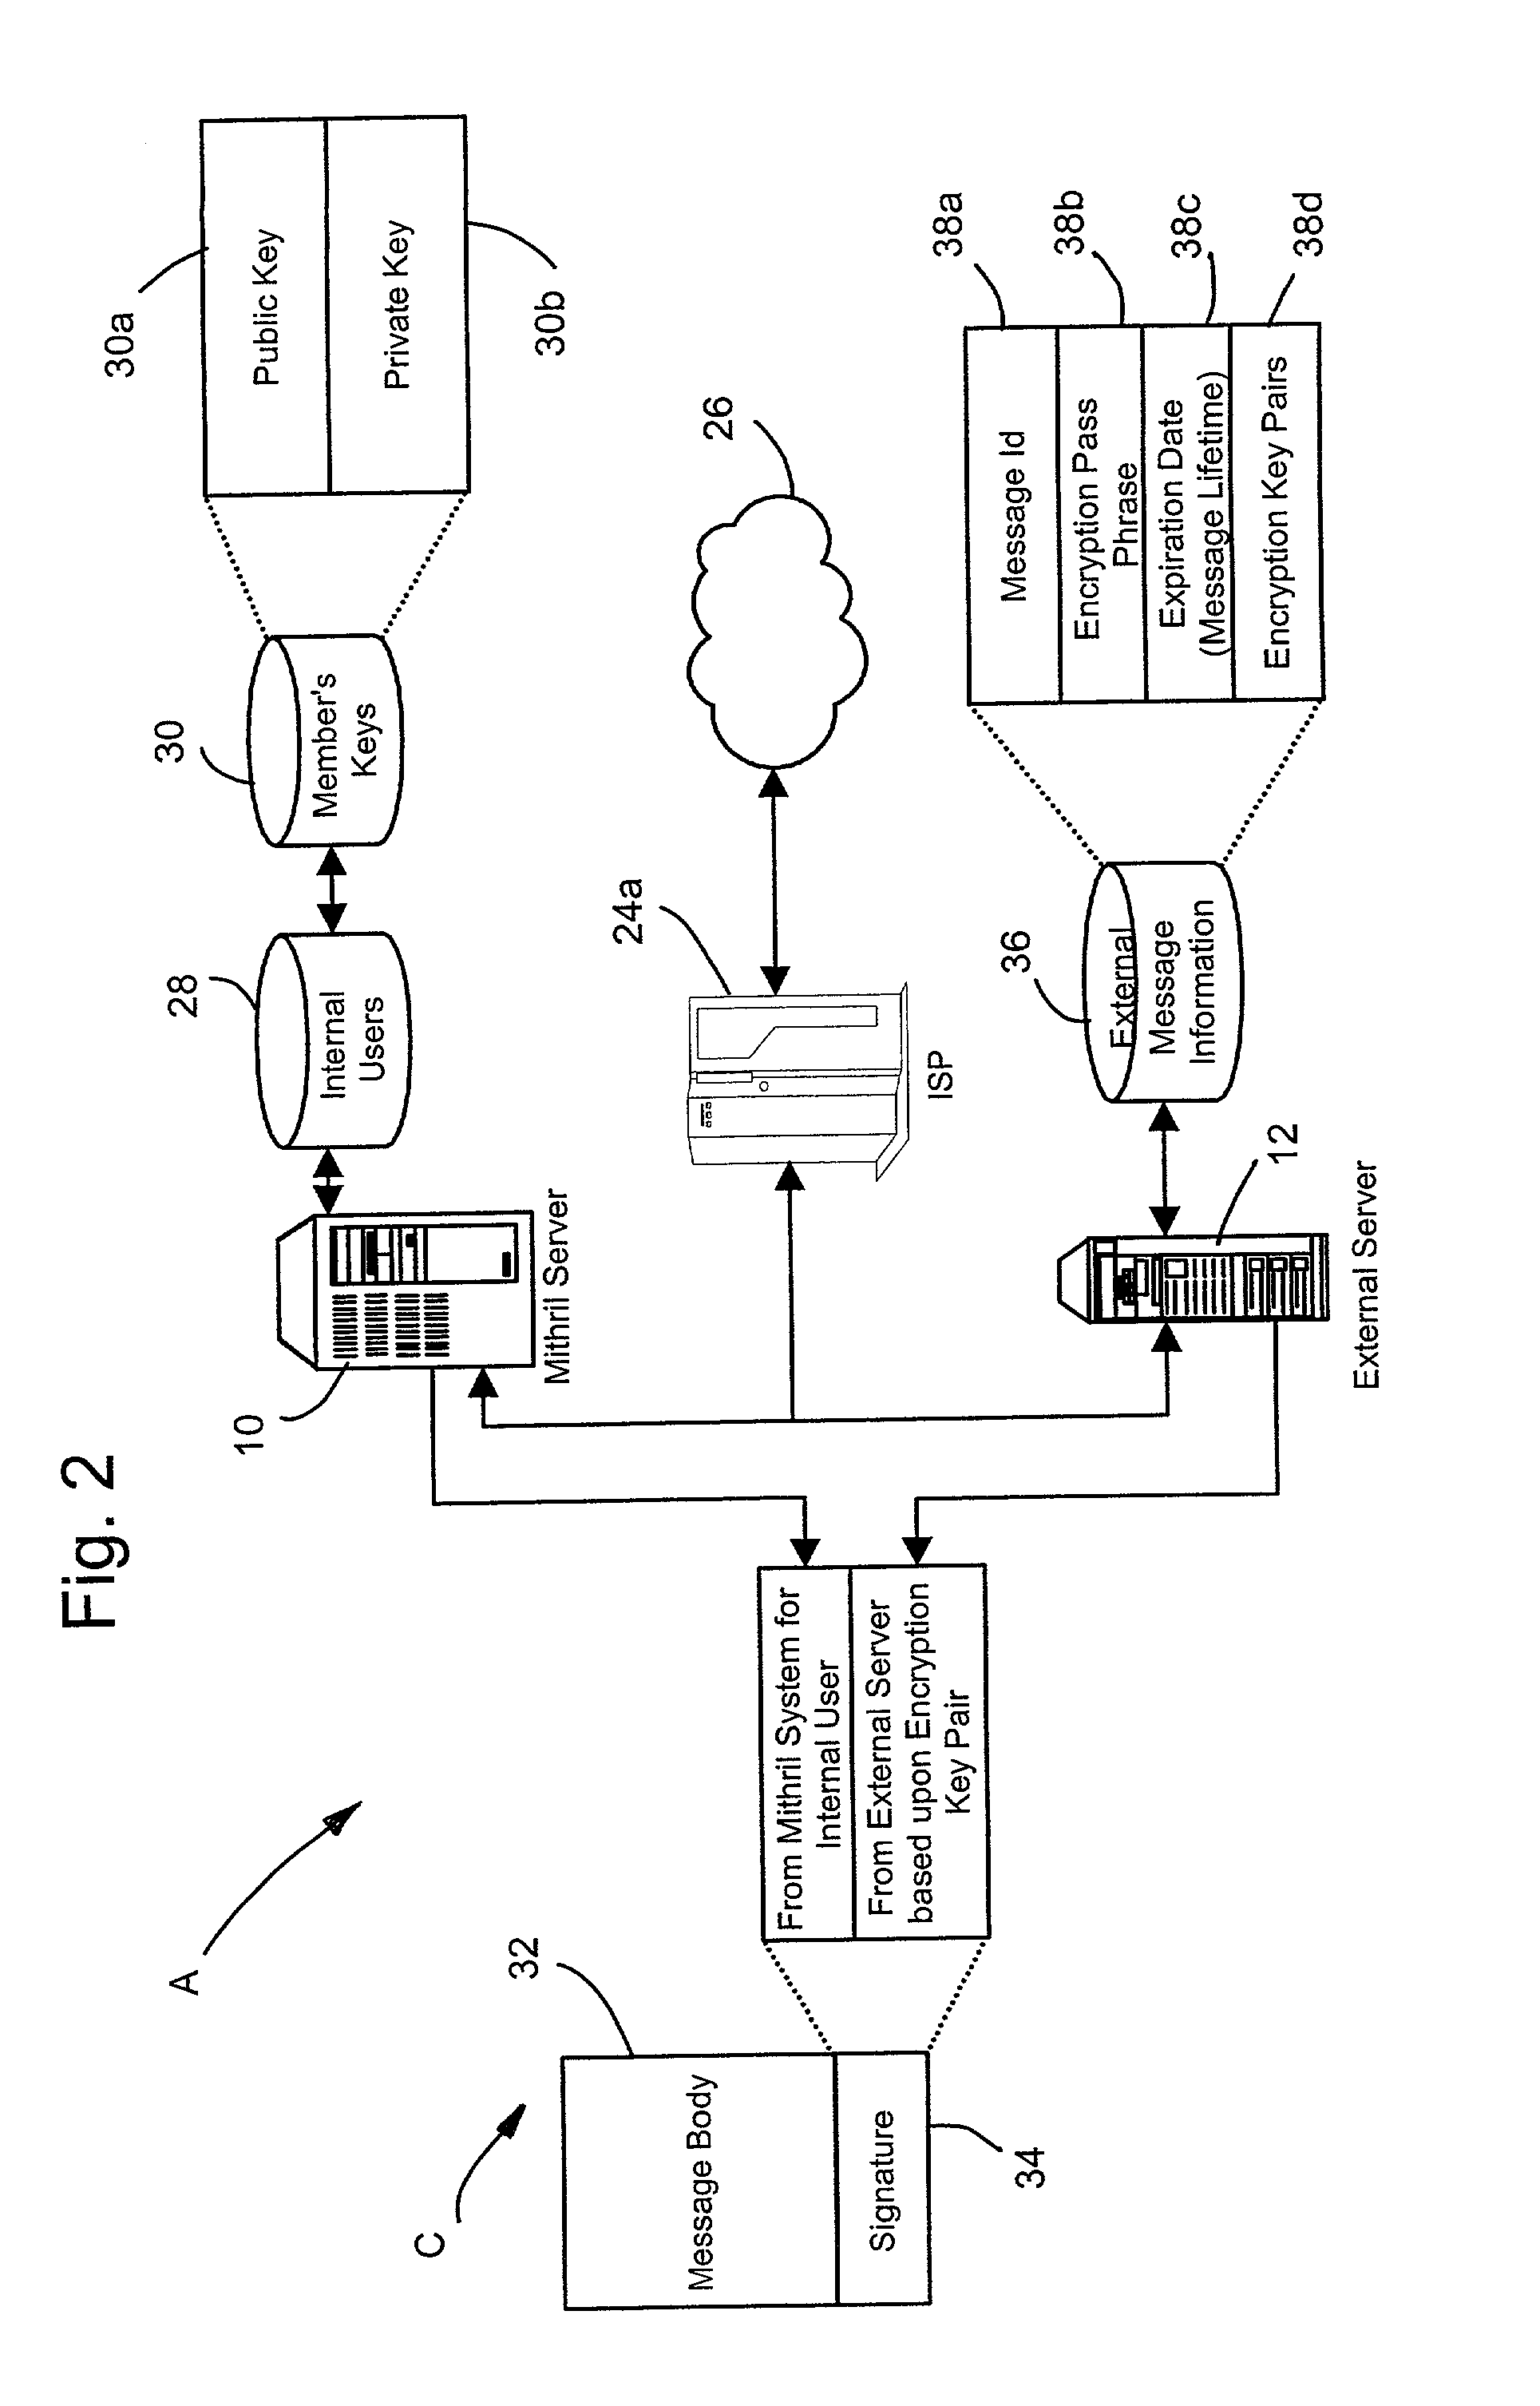 System and method for computerized global messaging encryption